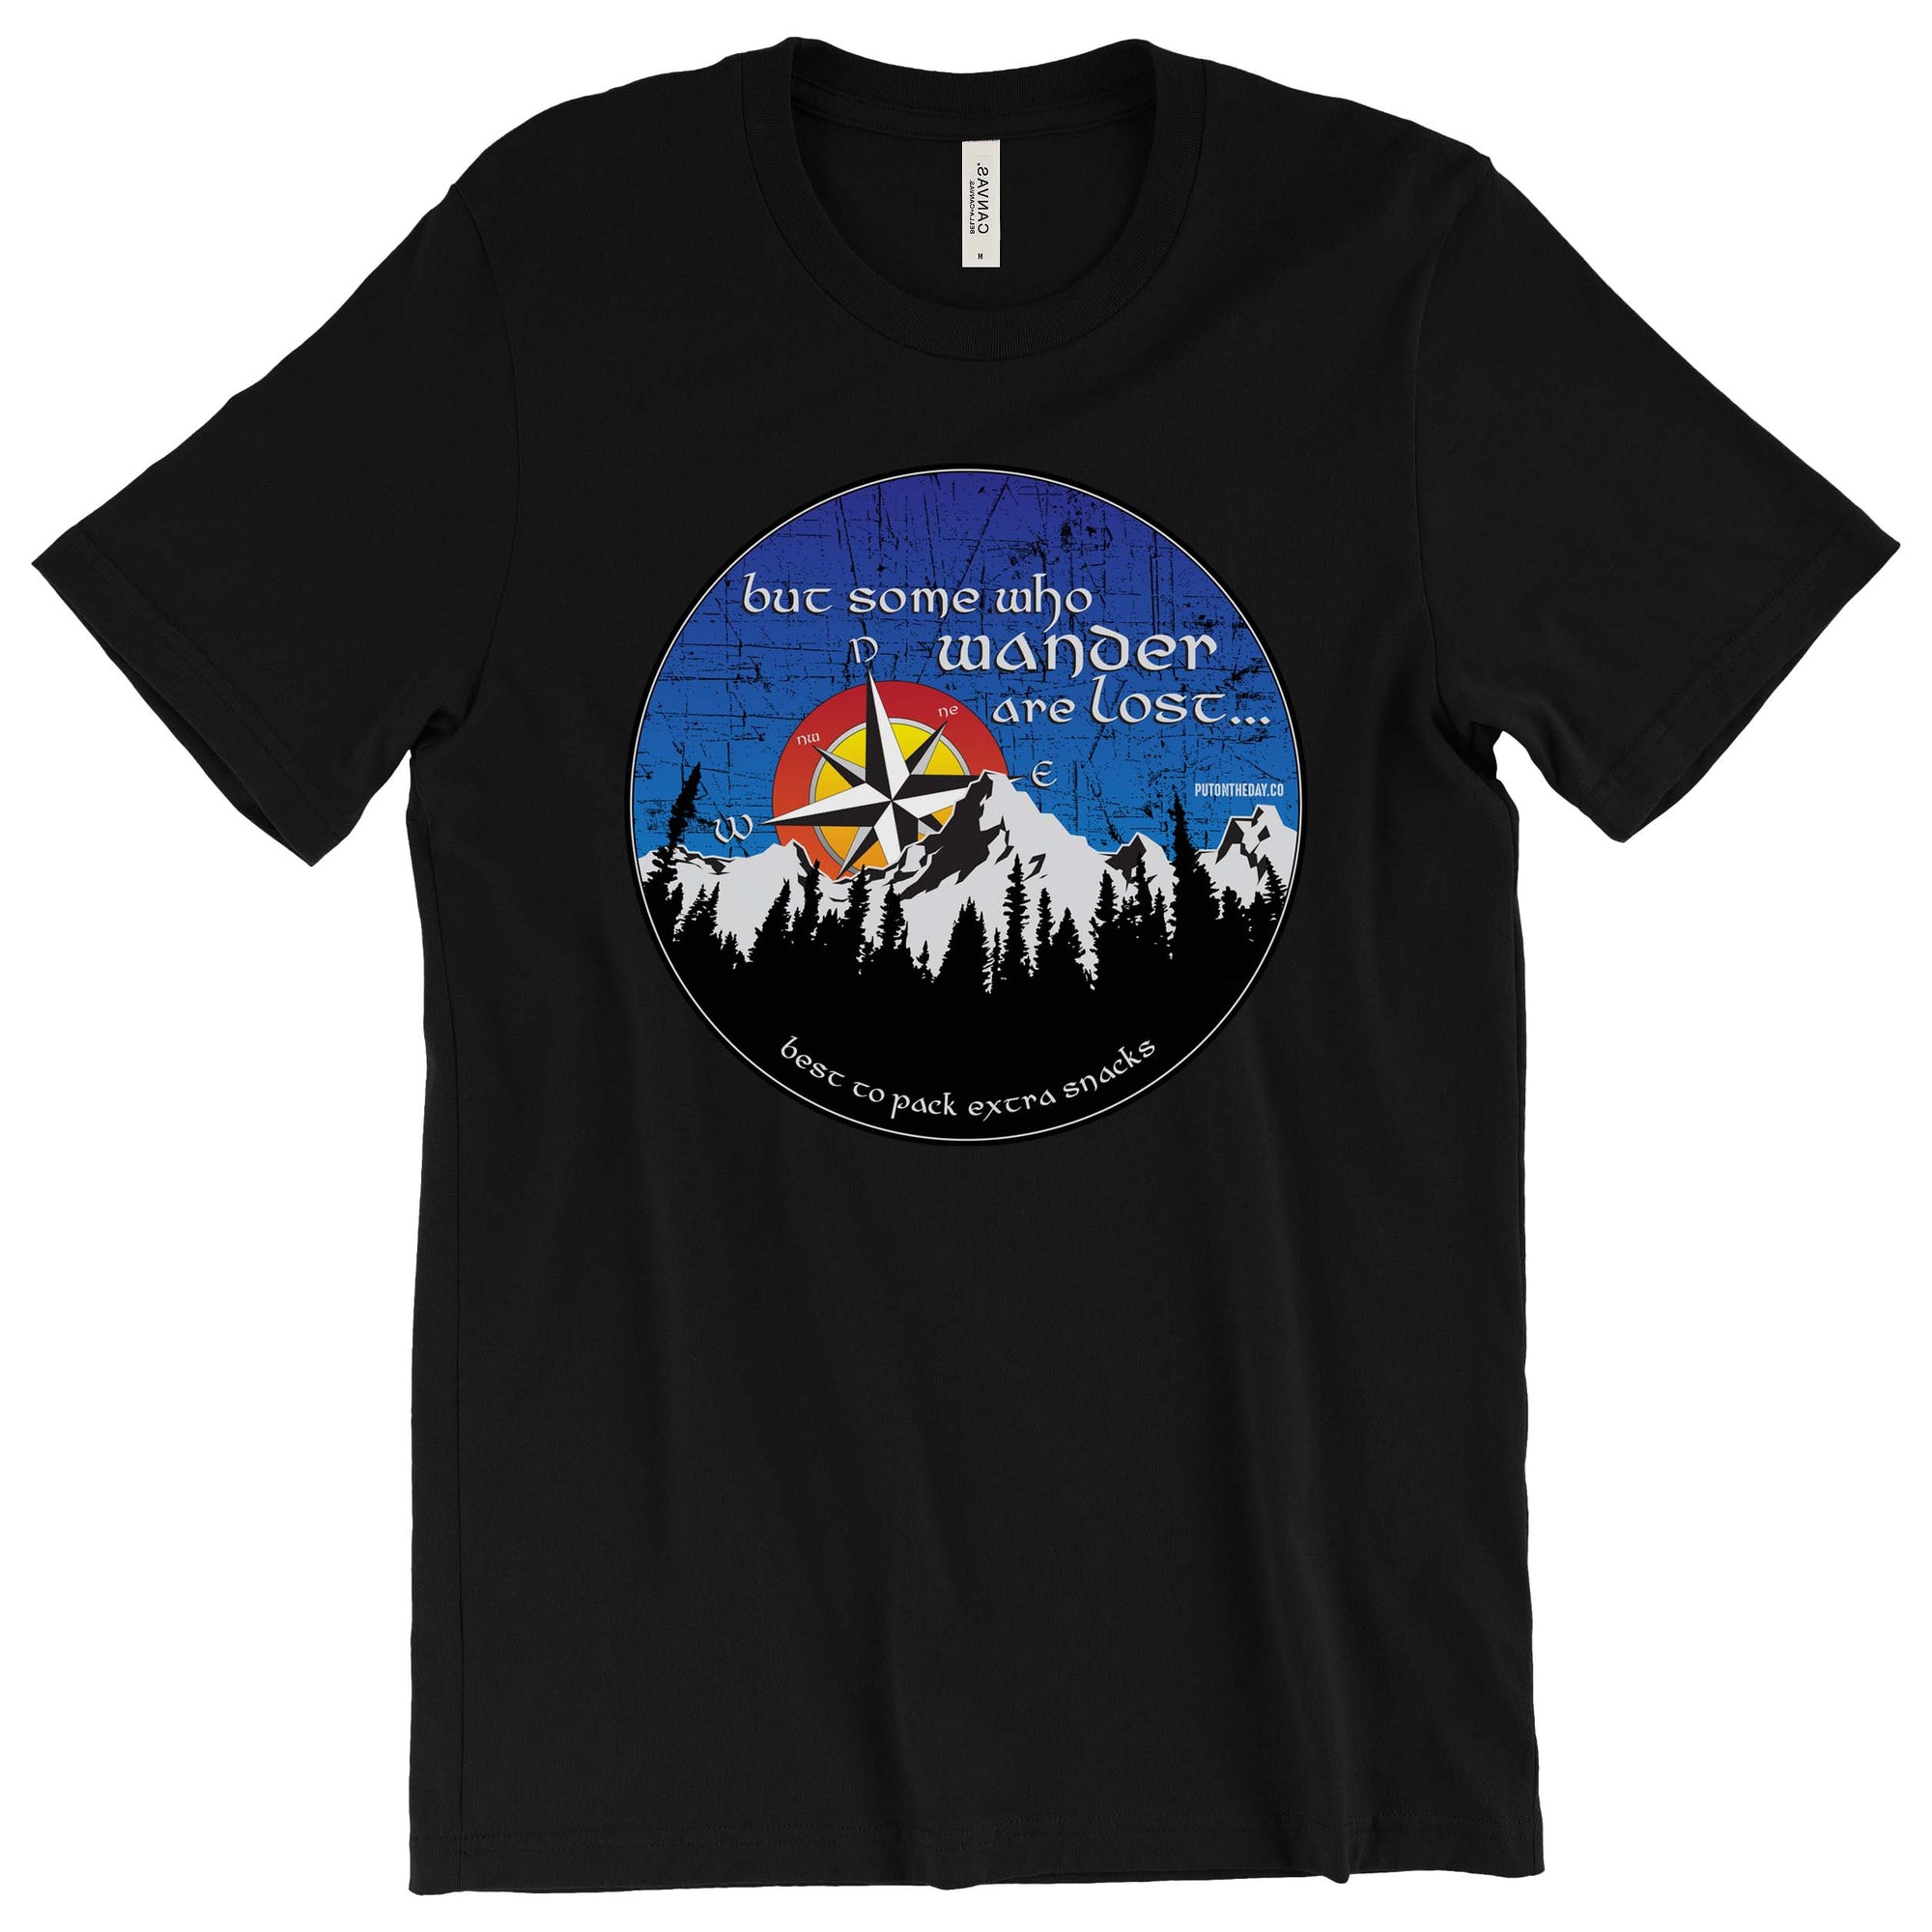 But some who wander are lost... T-Shirt Printify Heather Kelly L 